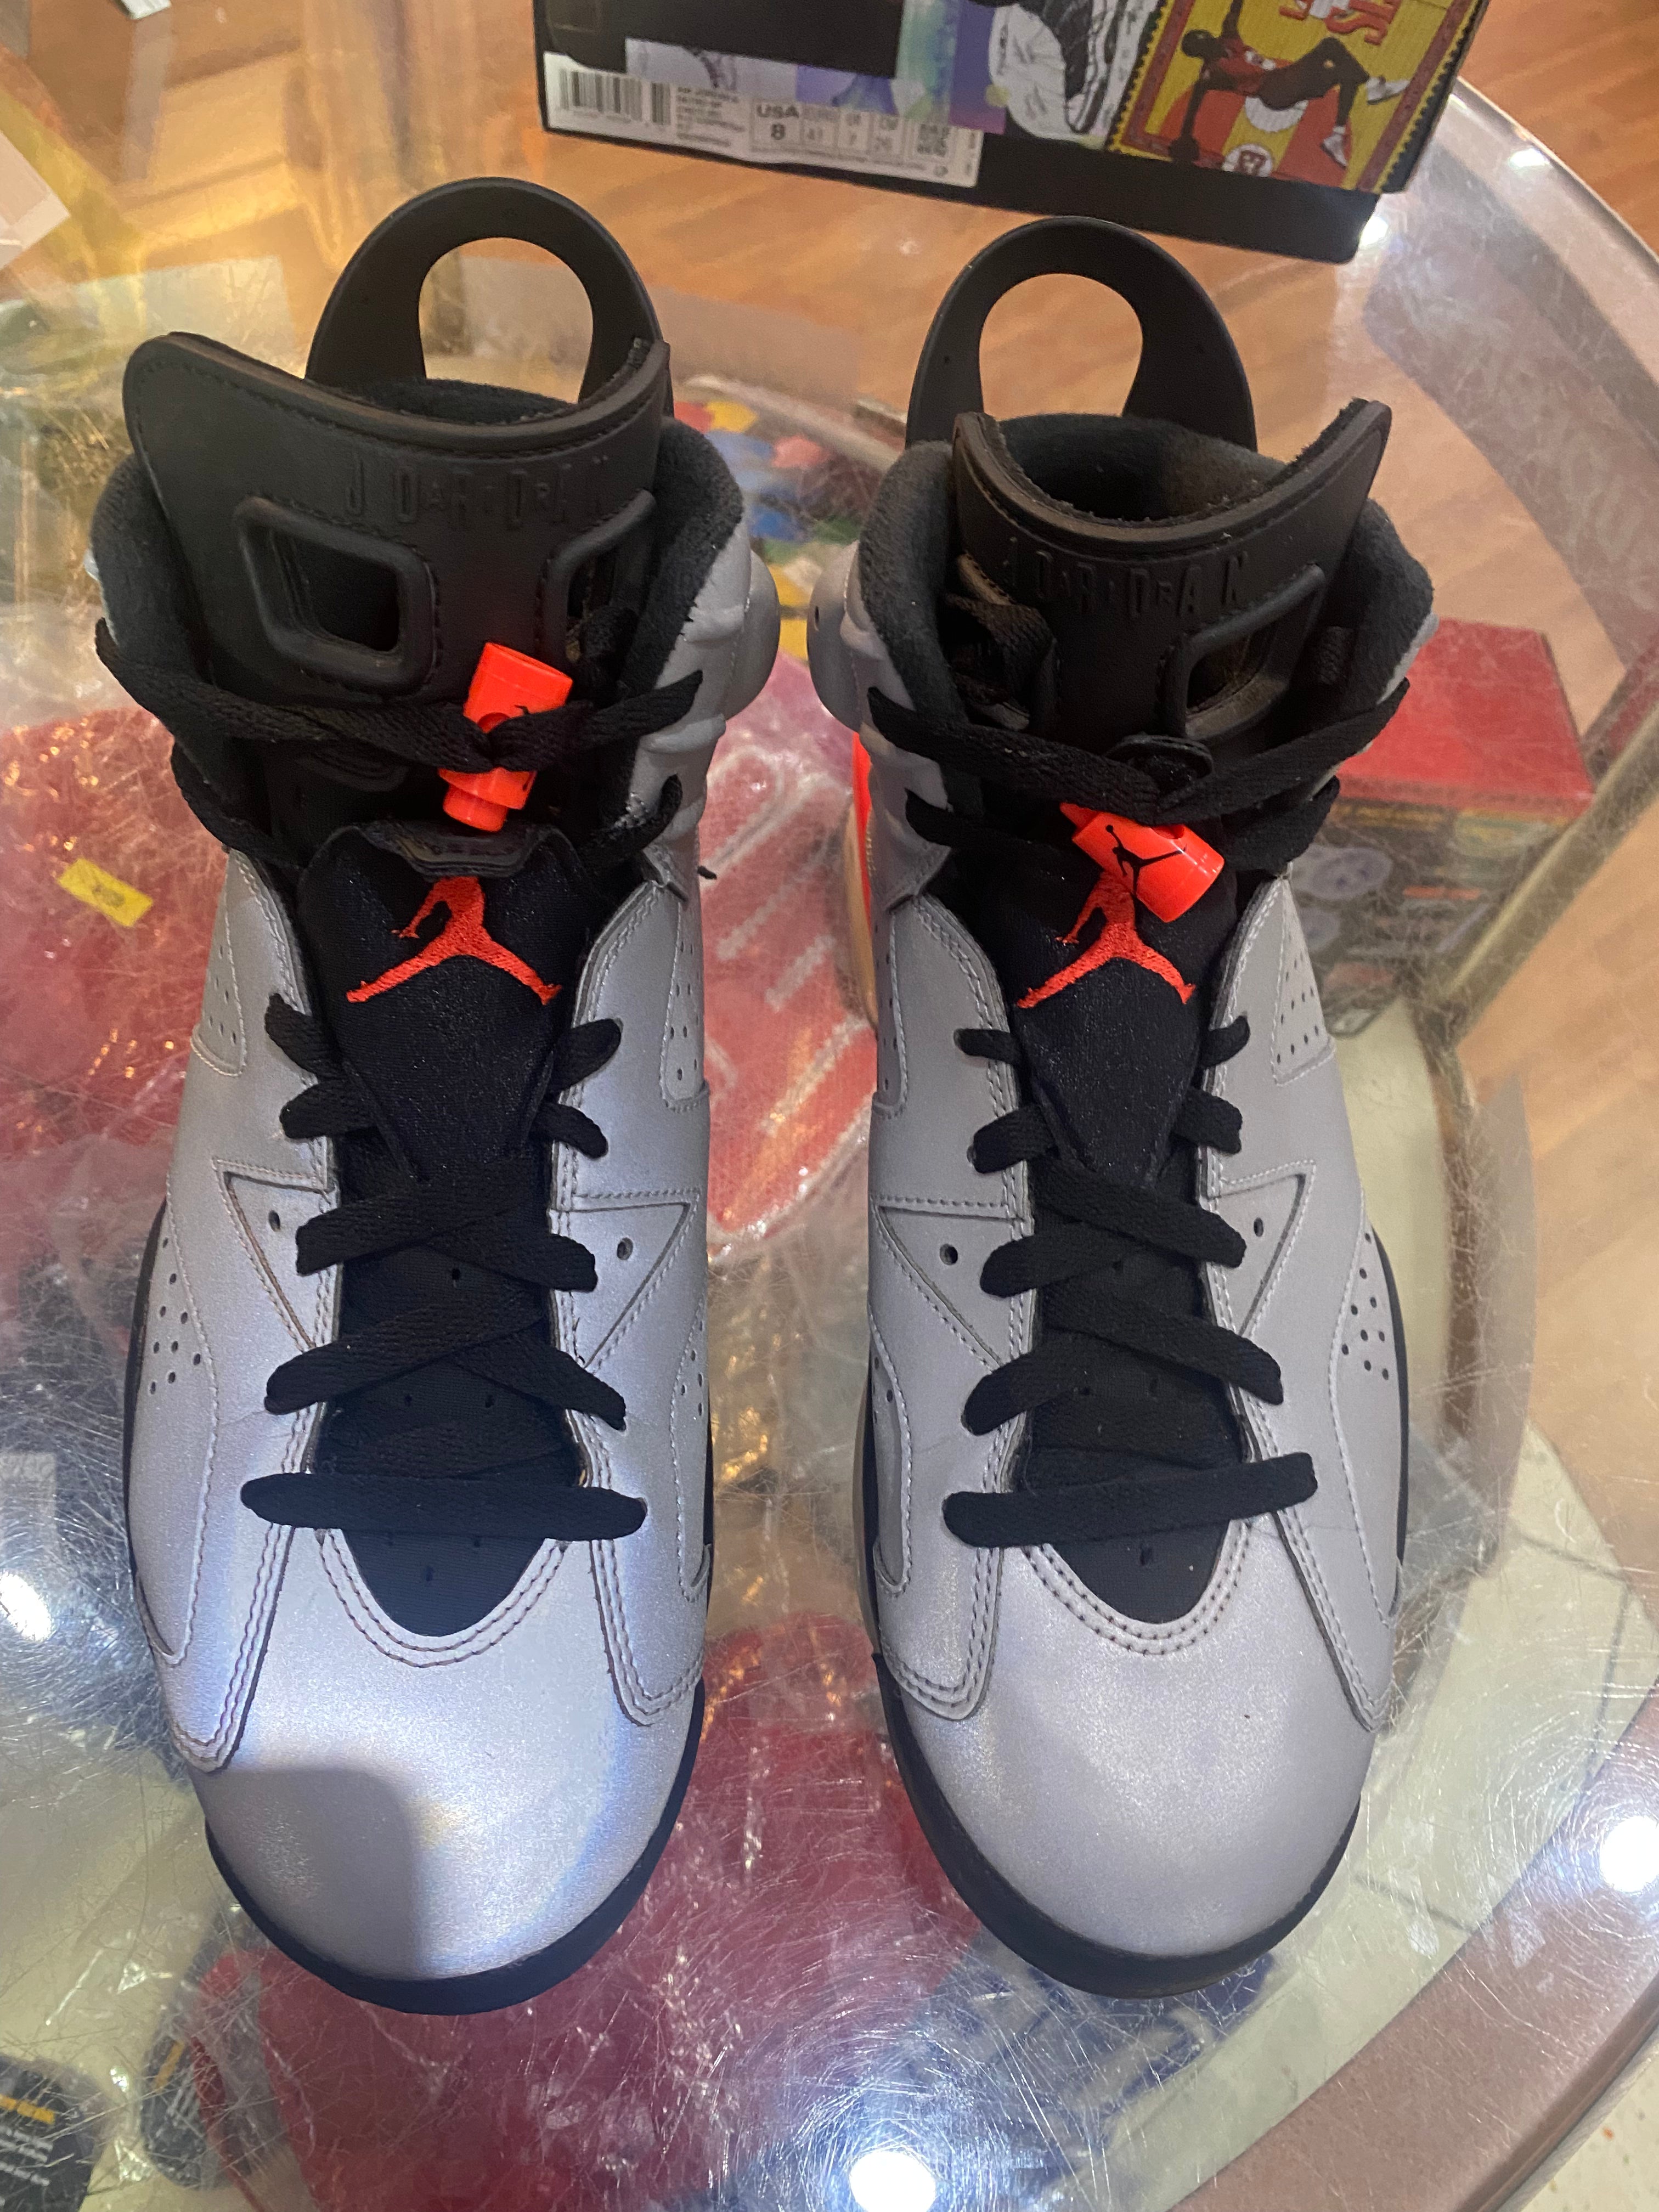 Reflection of Champion 6s size 8